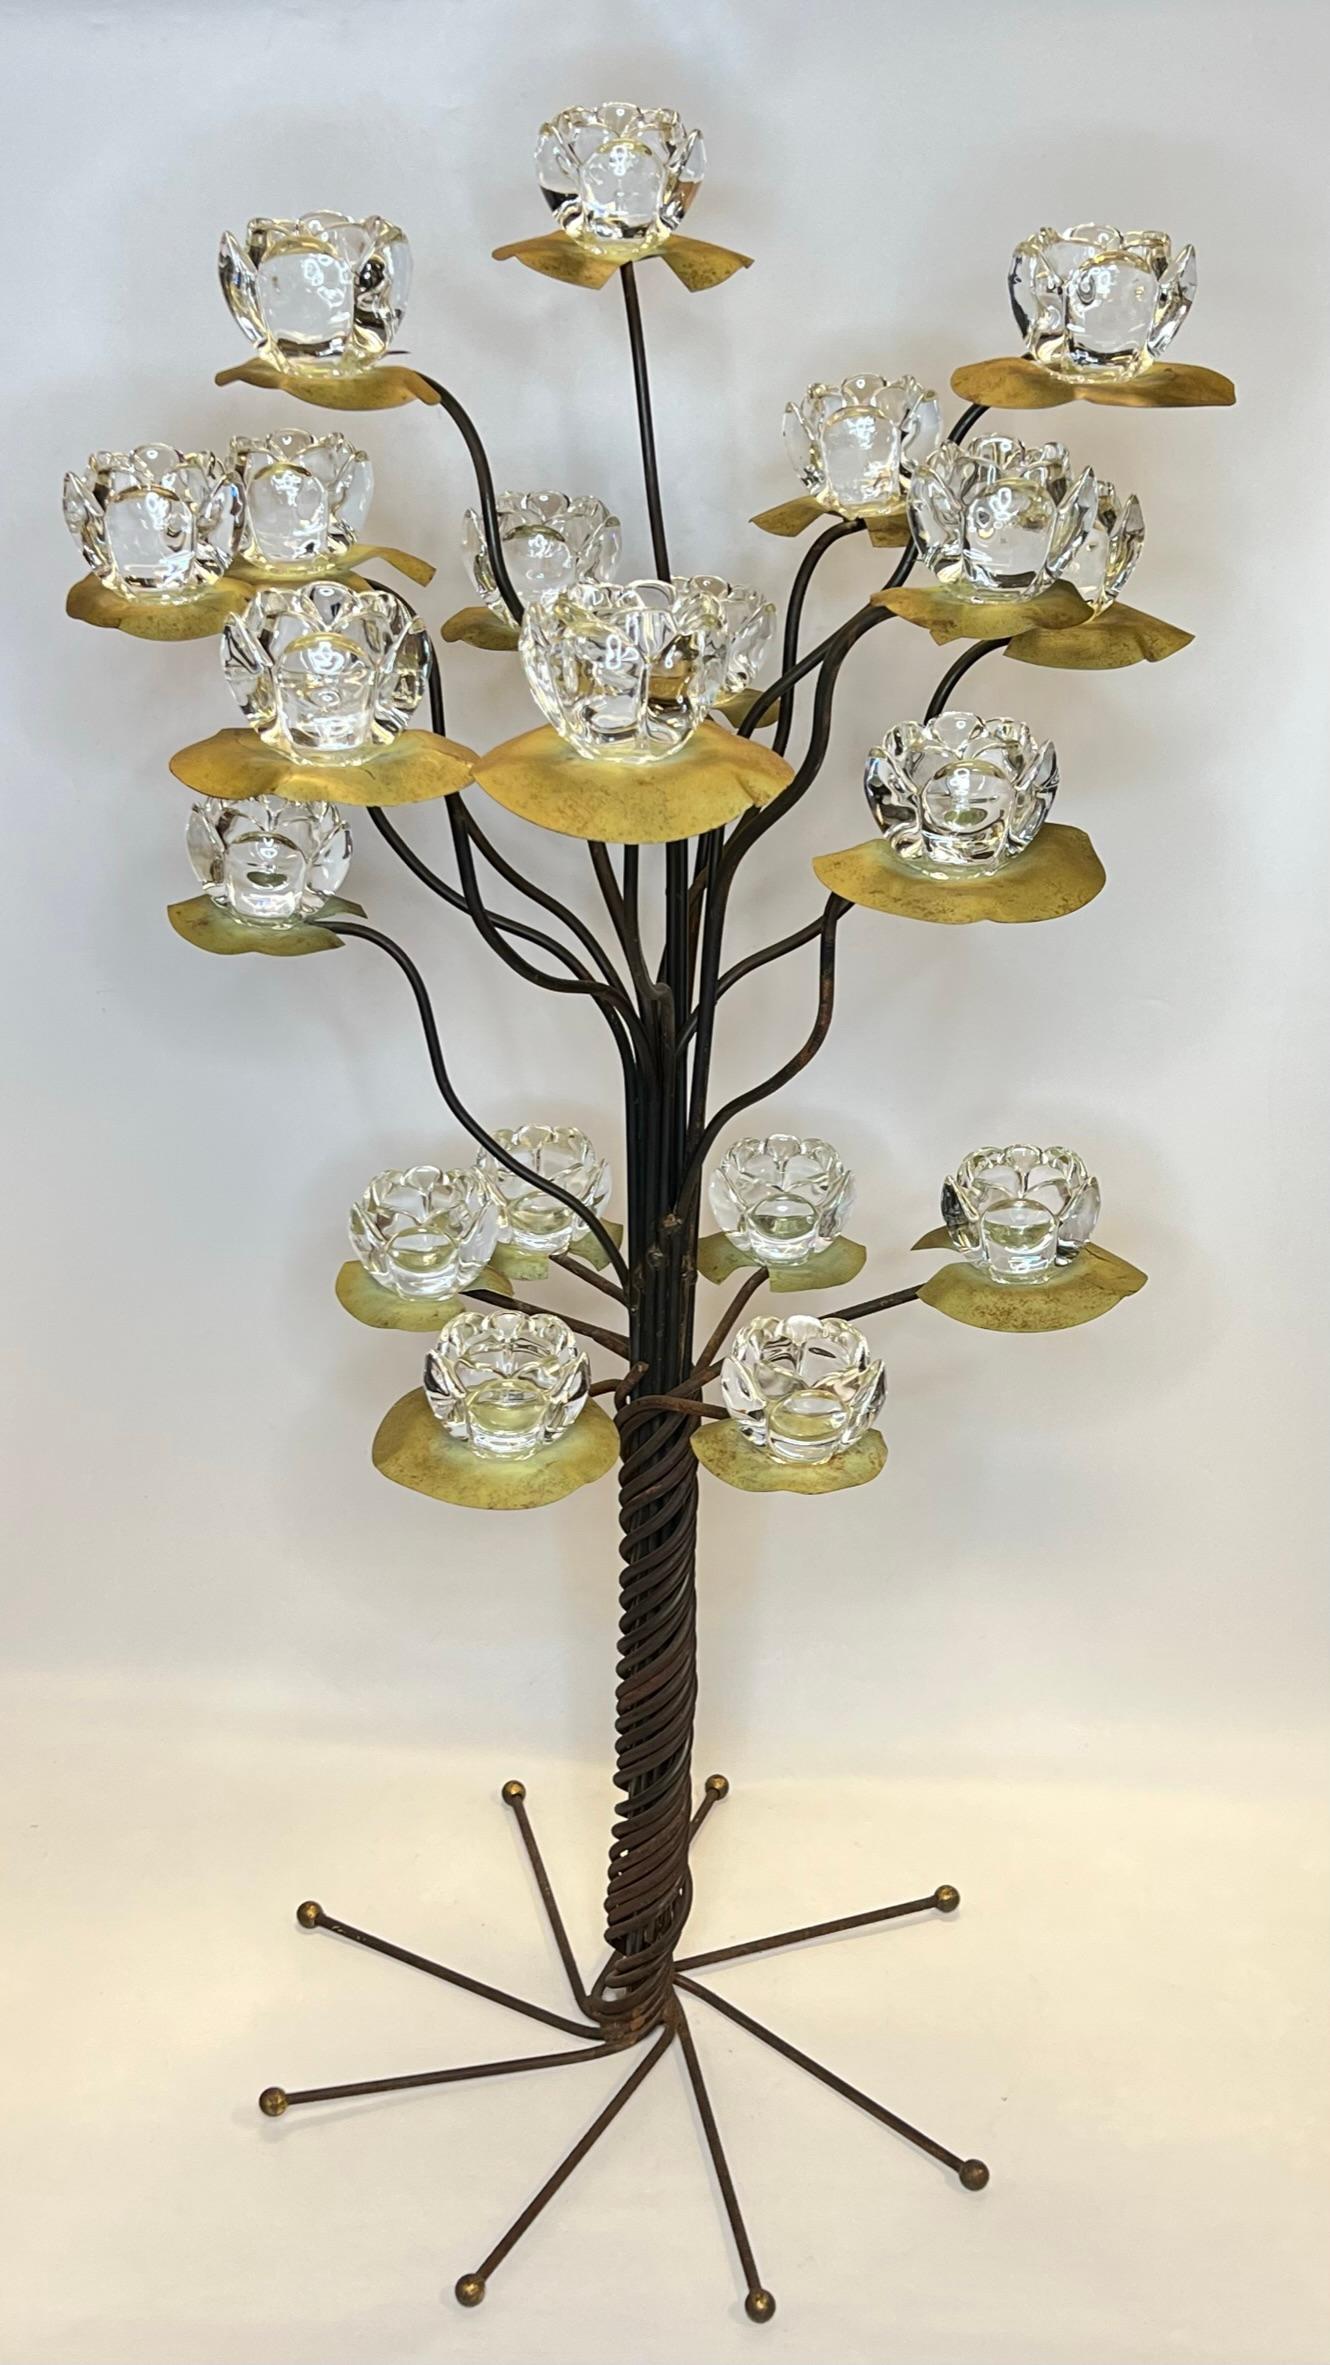 Mid-Century Modern Iron and Copper Floor Candelabra with Crystal Candle Holders For Sale 4